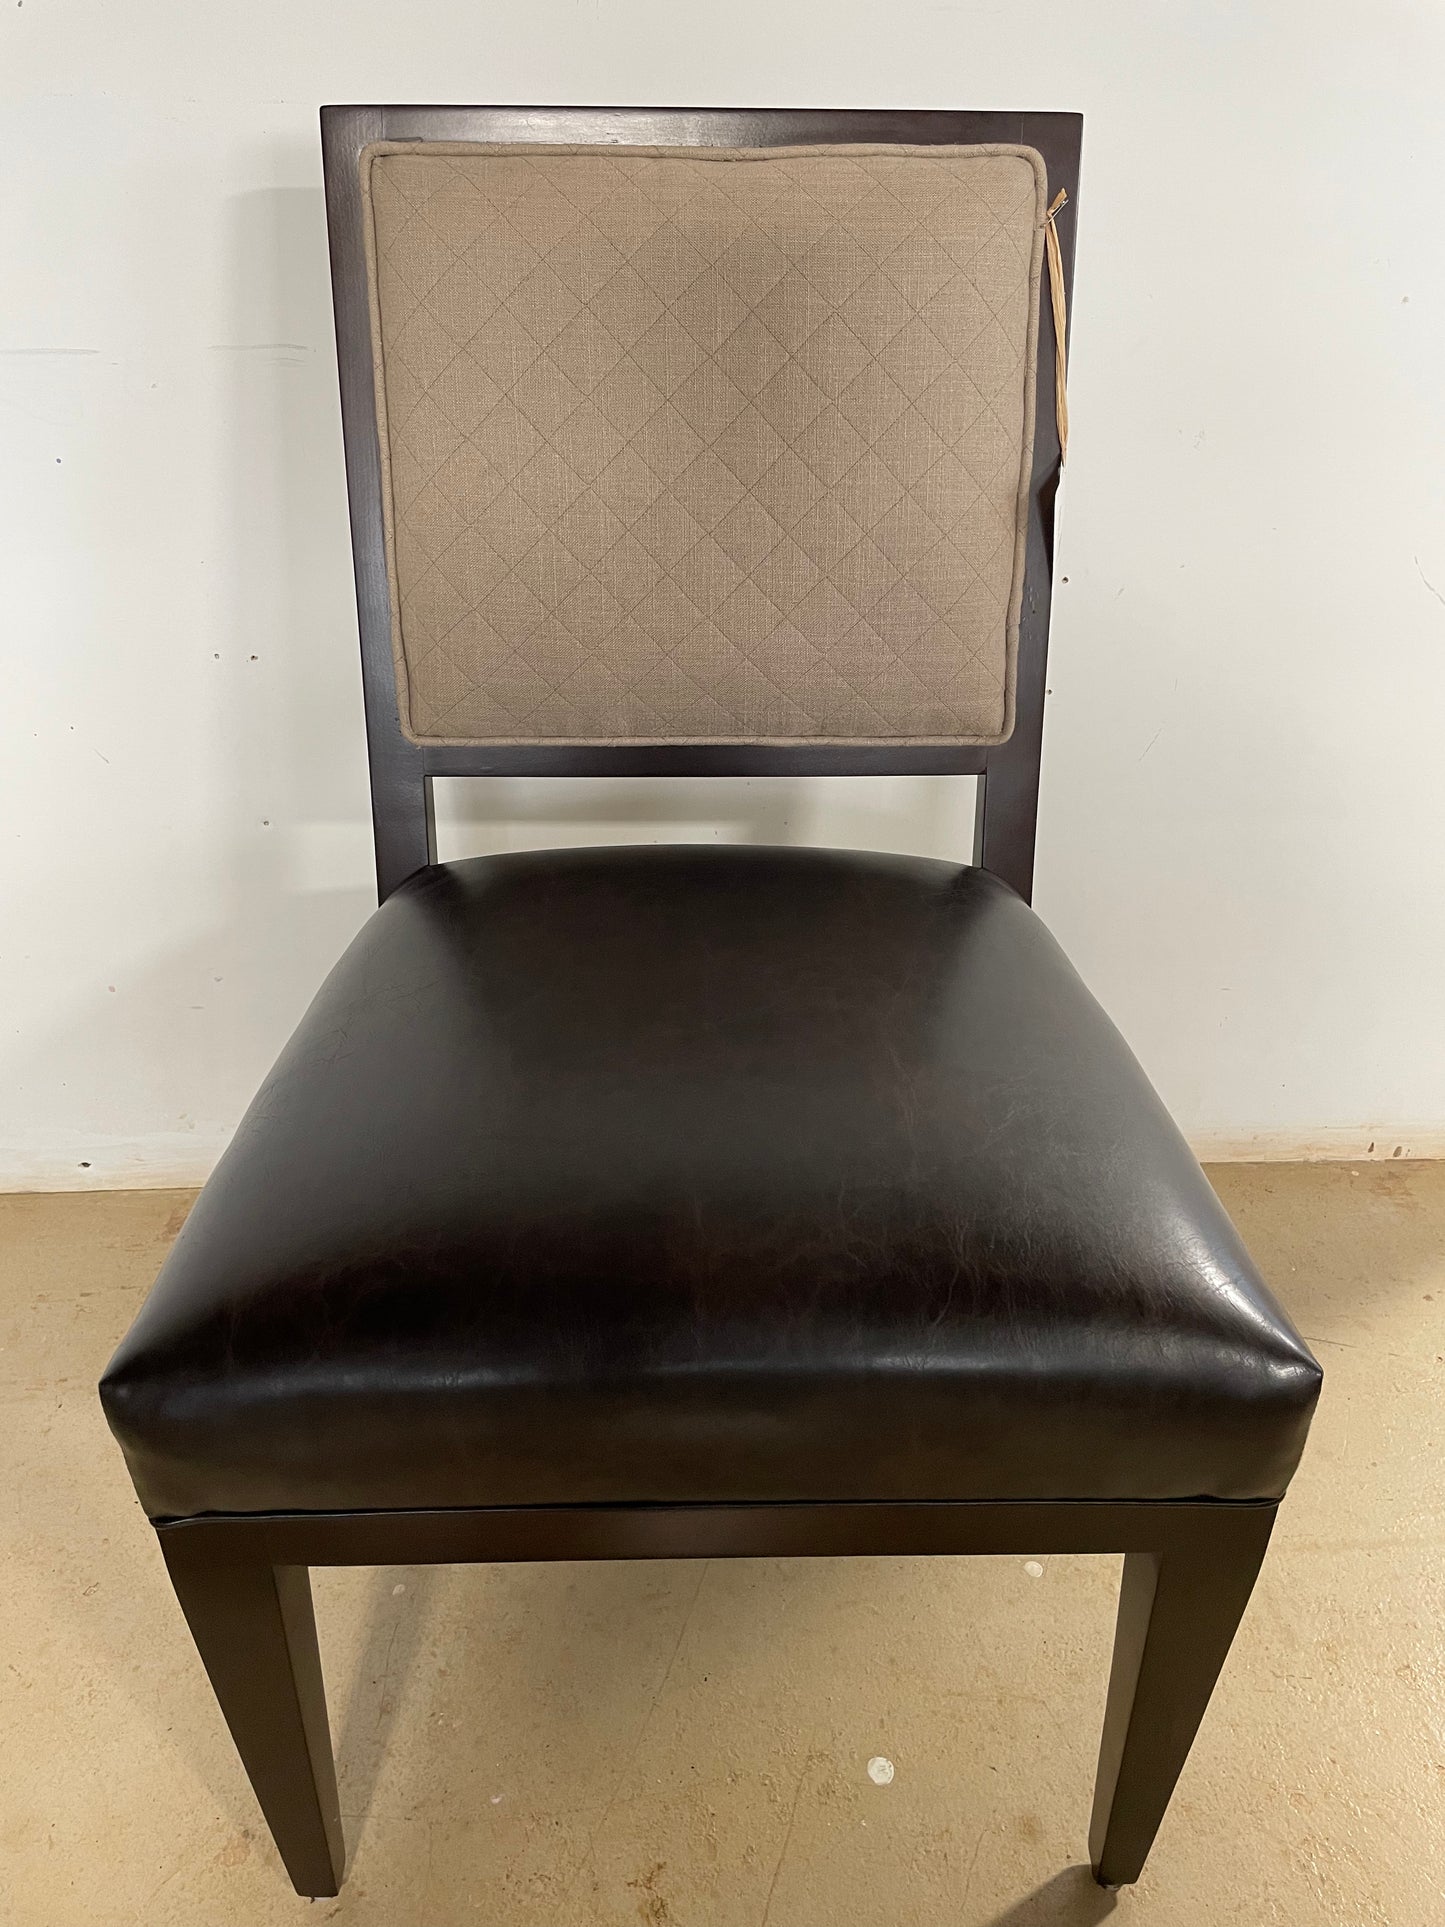 Leather desk chair